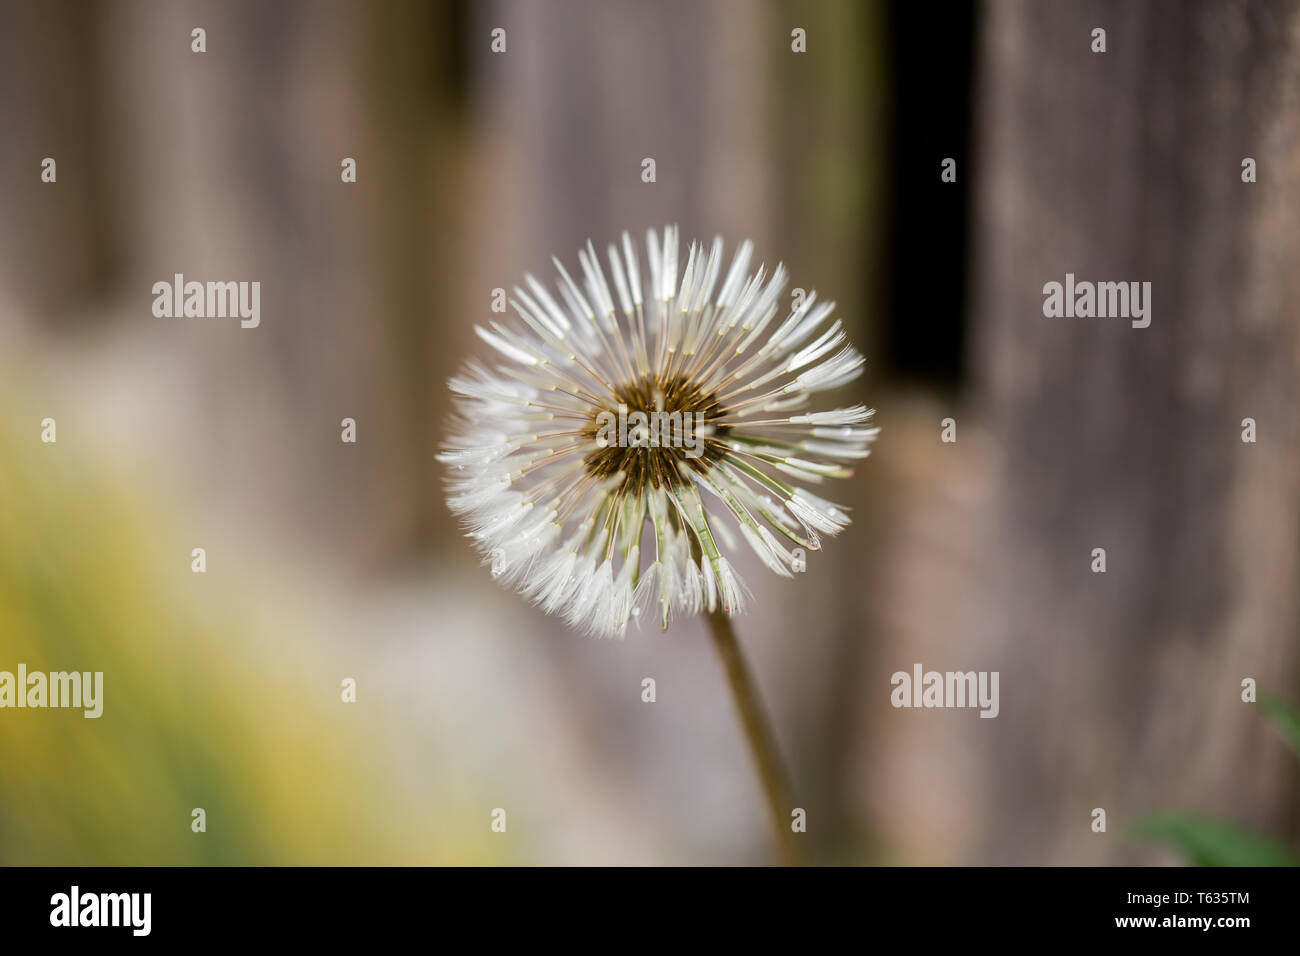 GAUTING, BAVARIA / GERMANY - April 27, 2018: Close up of taraxacum. Better known as dandelion, blowball or puffball. Stock Photo